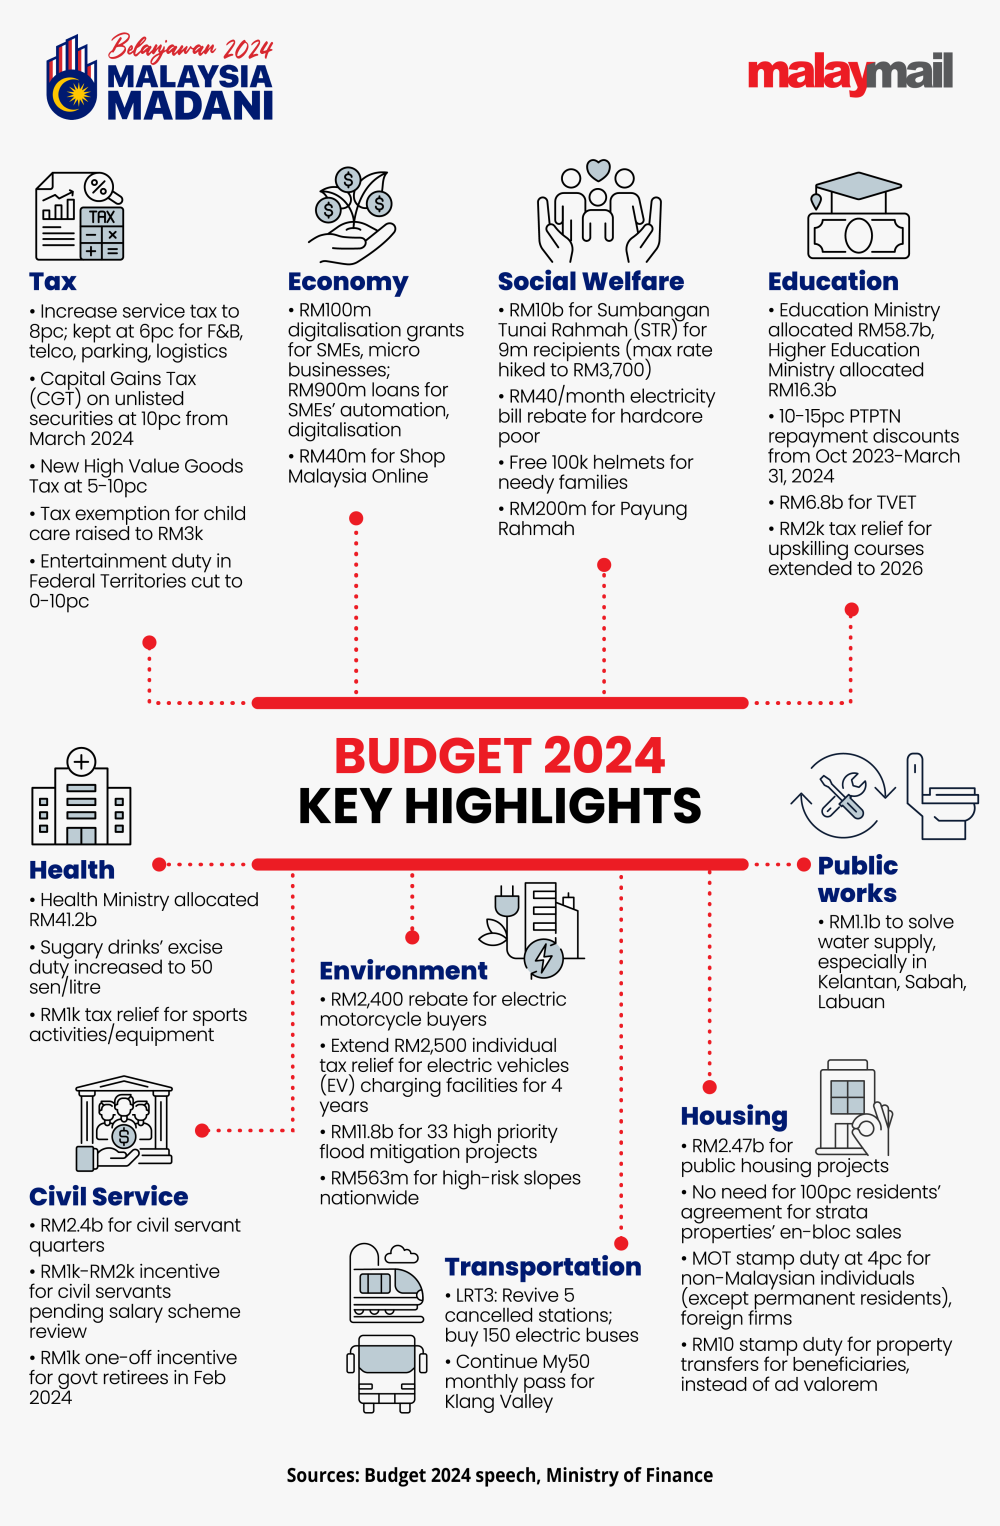 The winners and losers of Anwar’s Budget 2024 Malay Mail